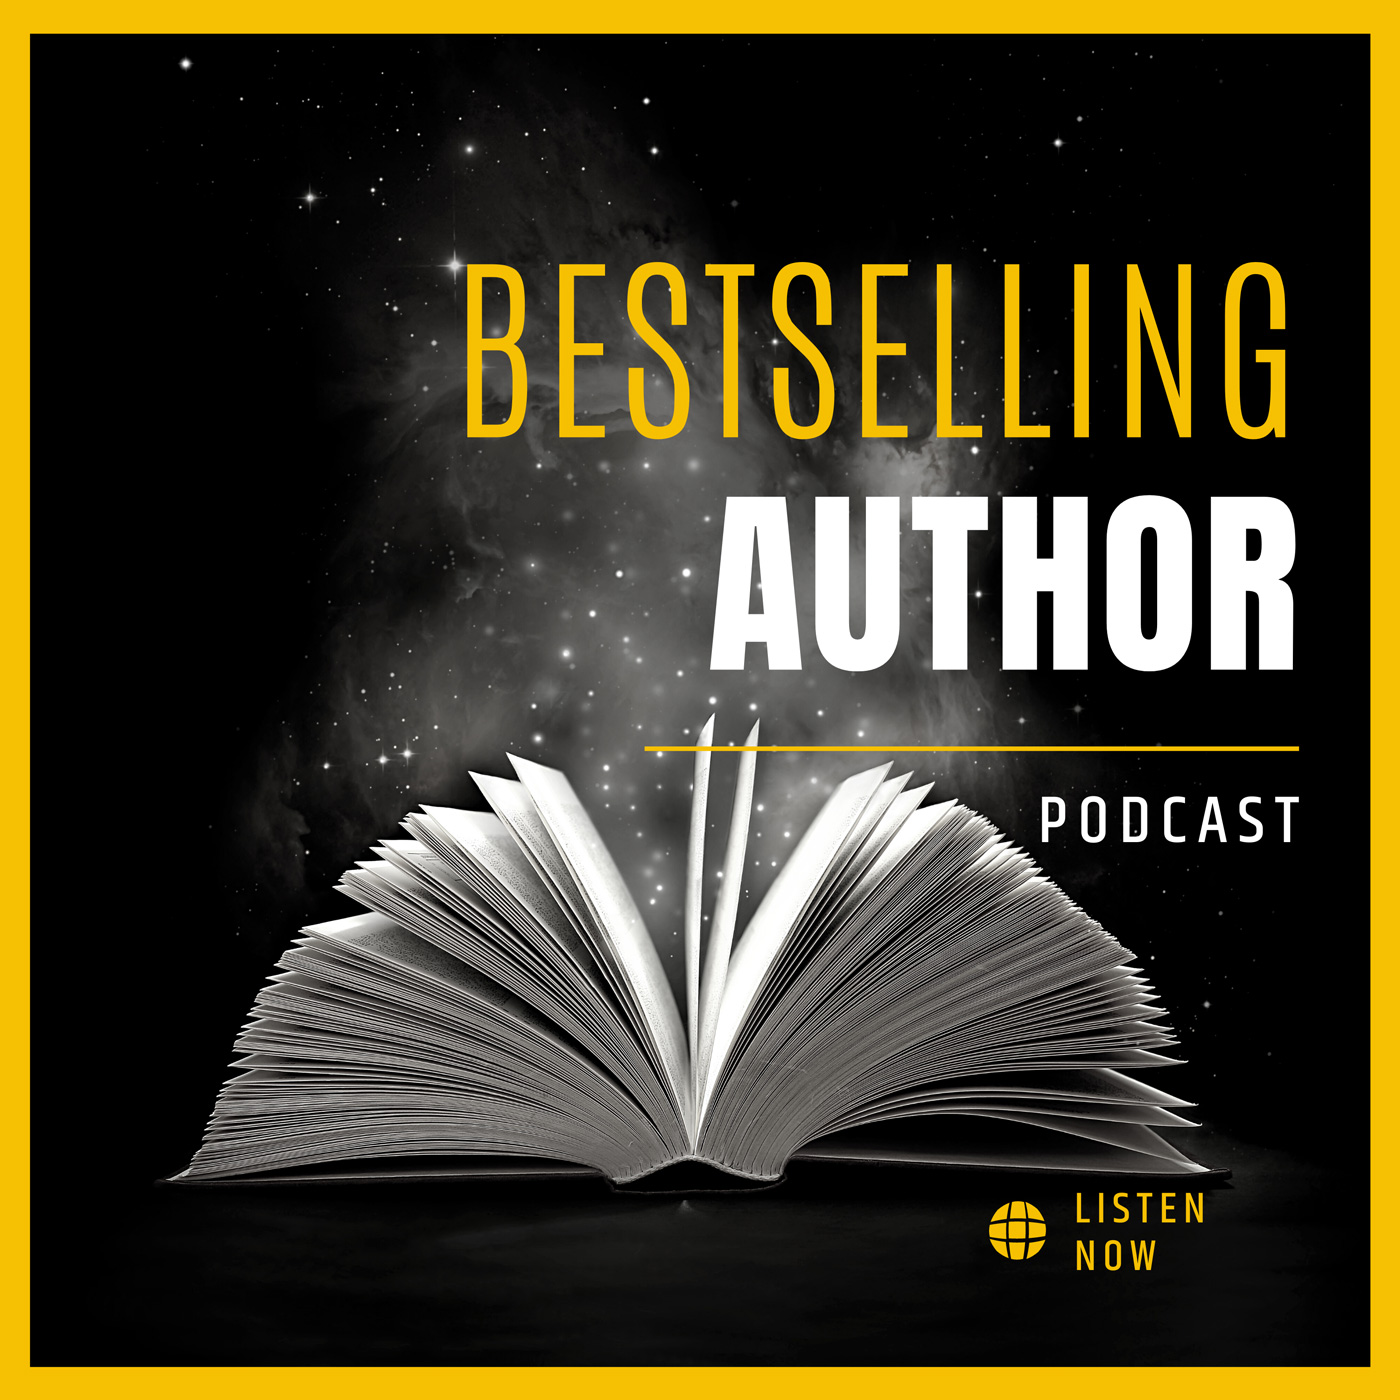 Bestselling Author Podcast